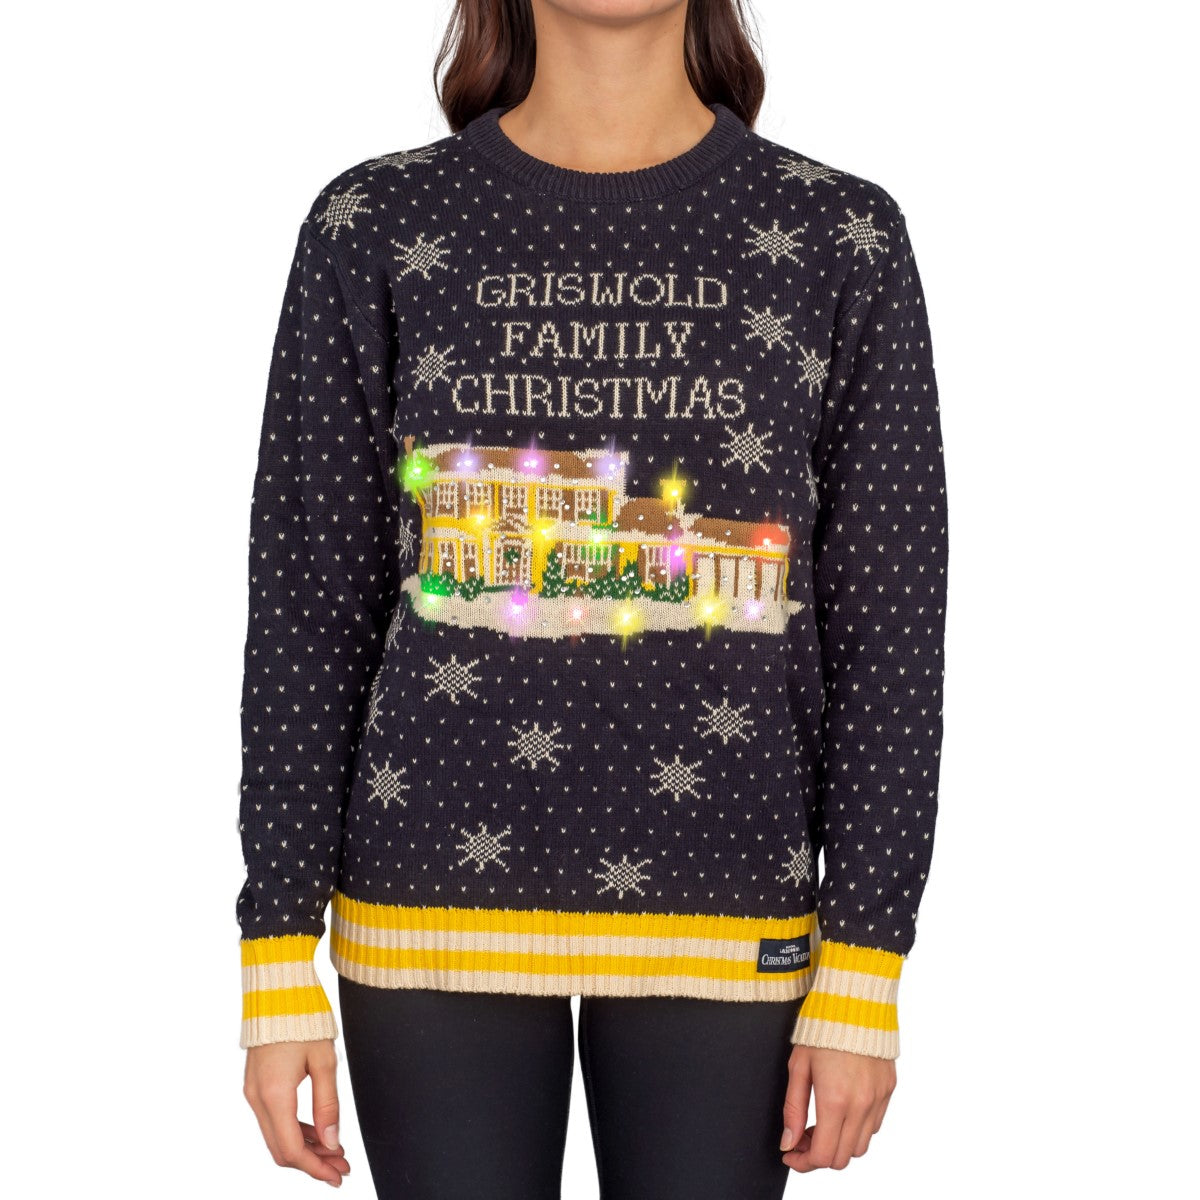 Big Boobs Ugly Christmas Sweater – D&F Clothing